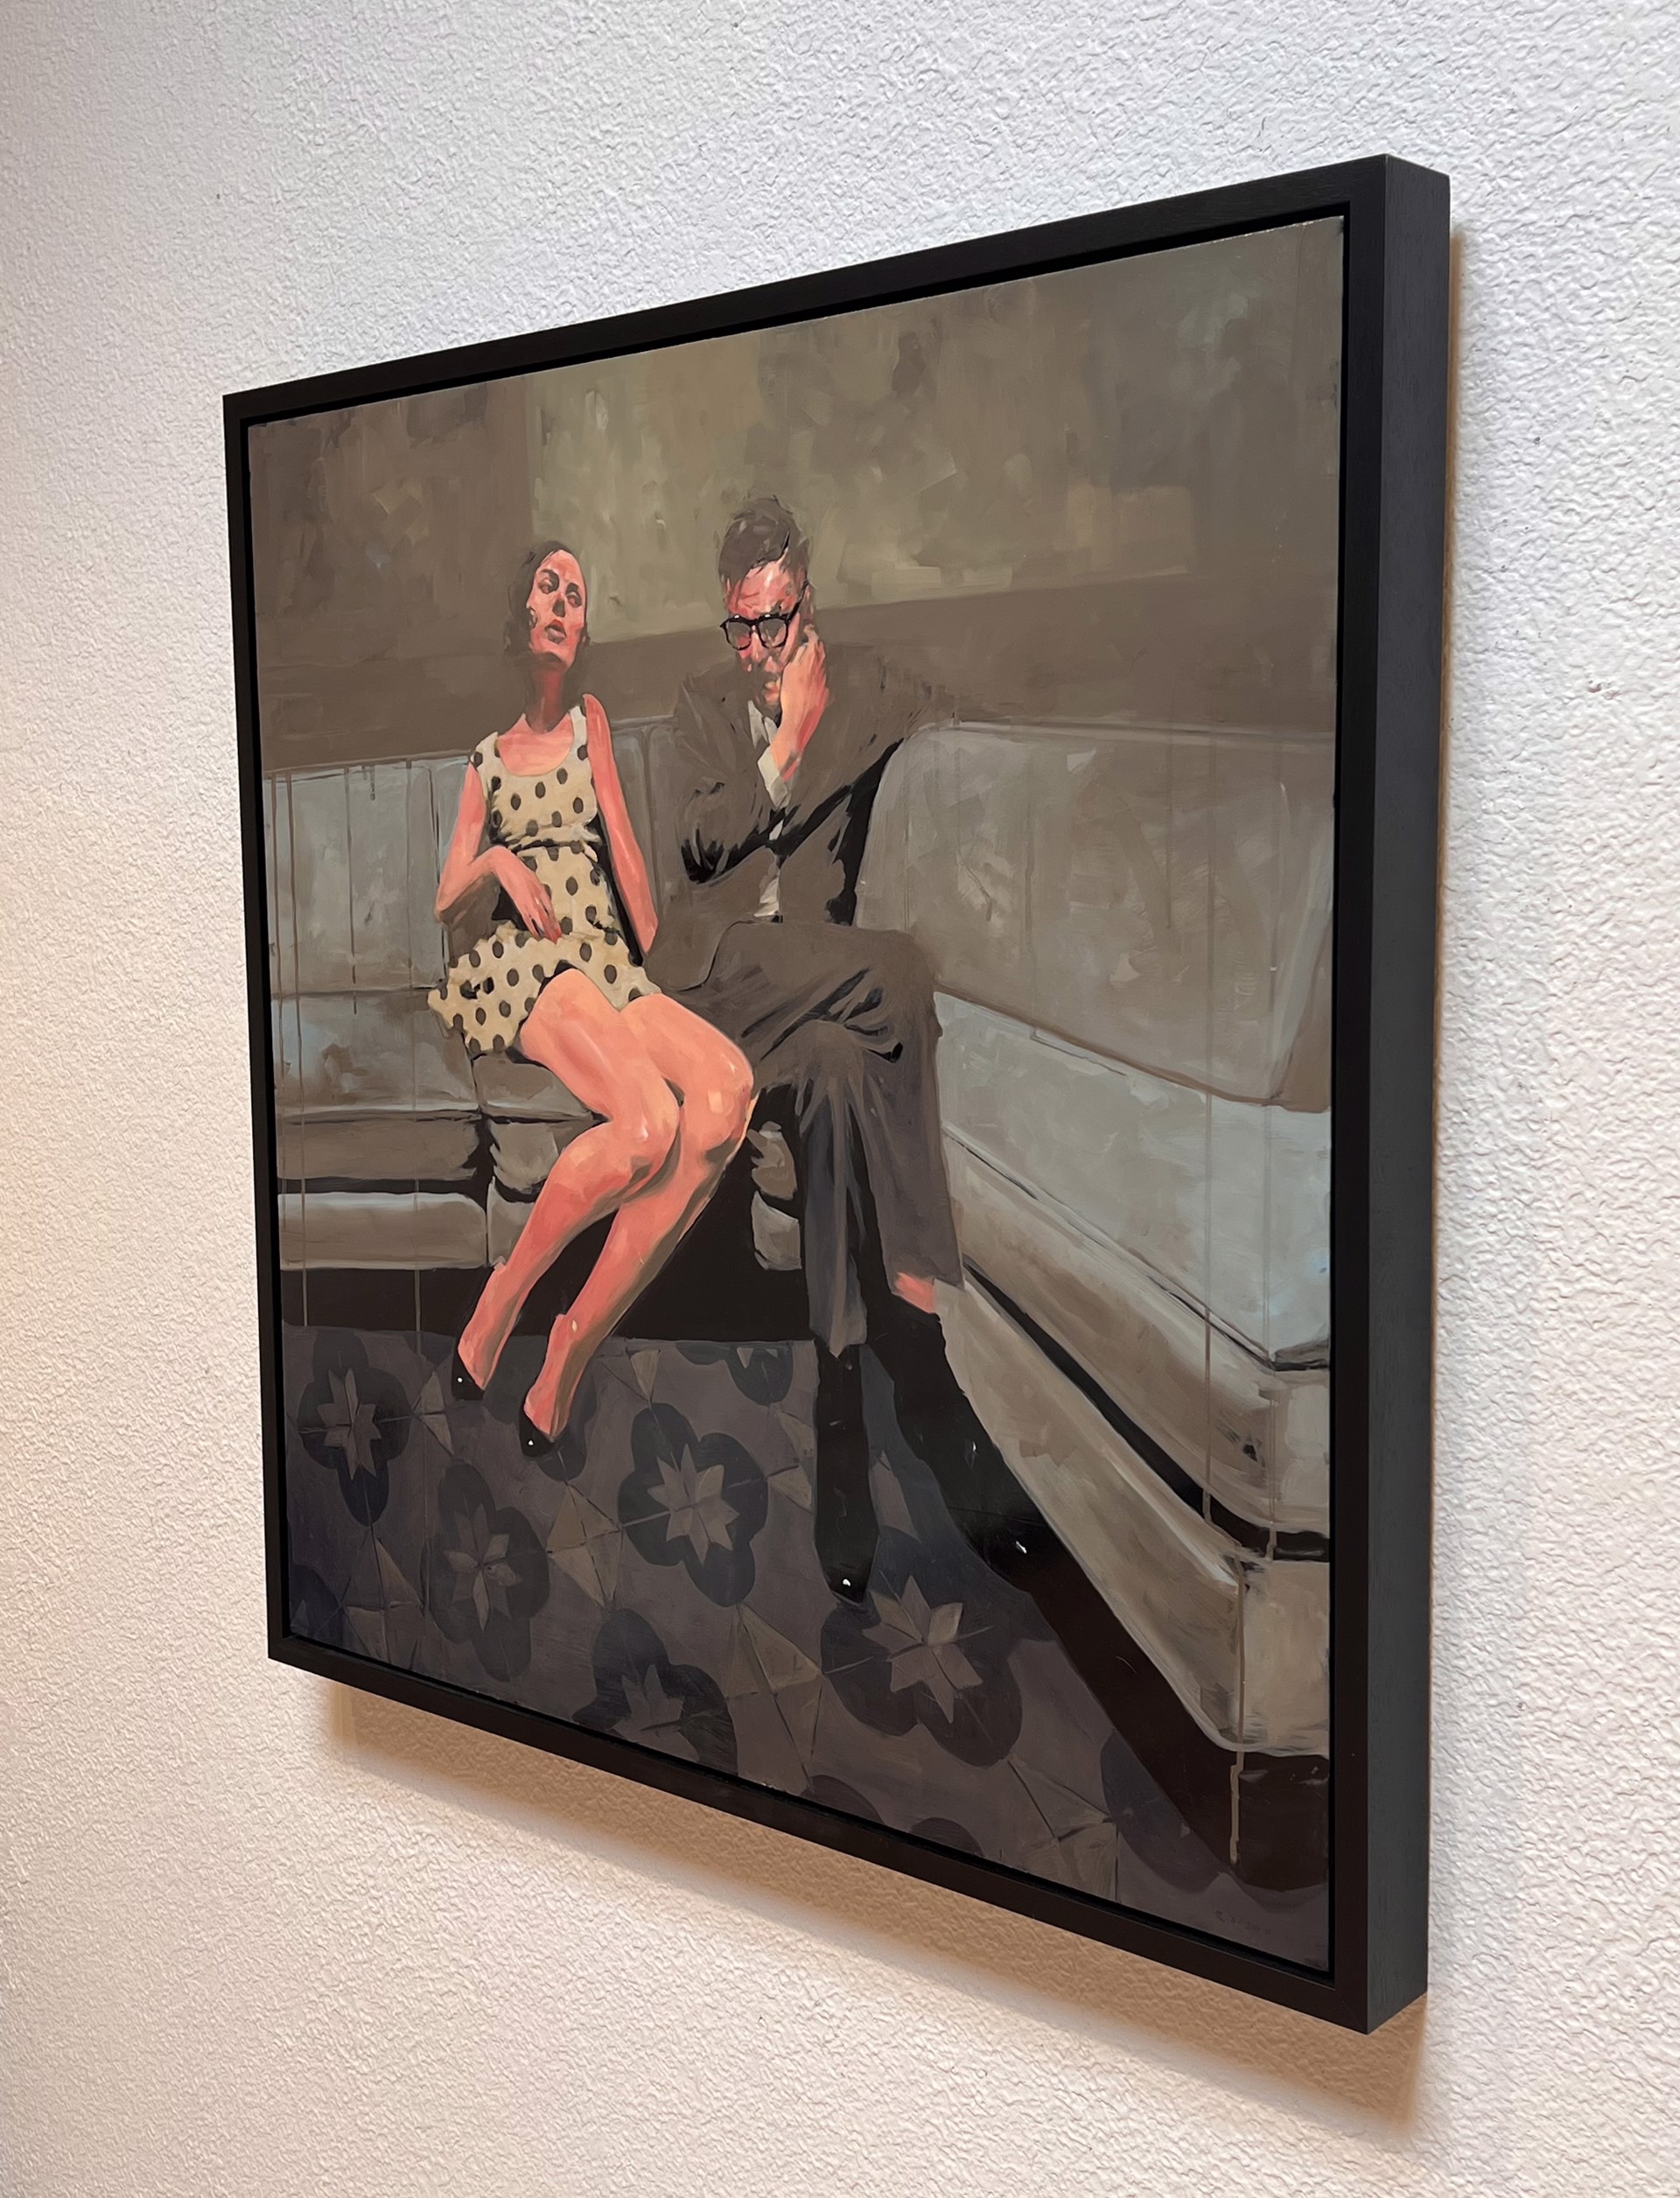 Spanish Tiles by Michael Carson